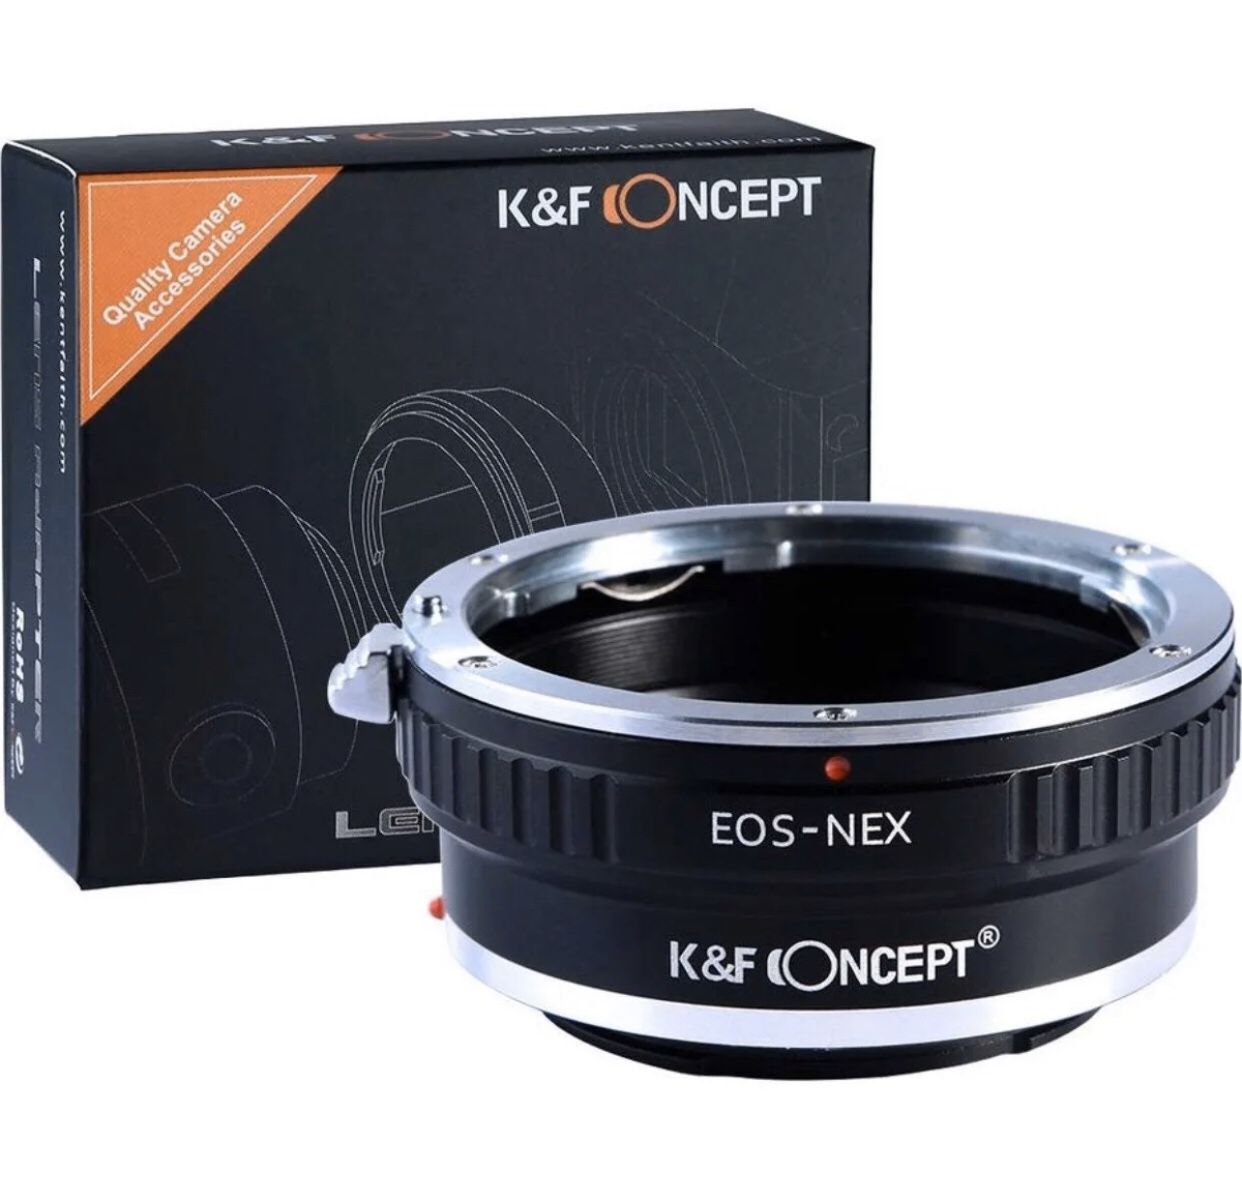 NEW K&F Concept Canon EOS to Sony lens adapter video - photography - students - camera - Mirrorless